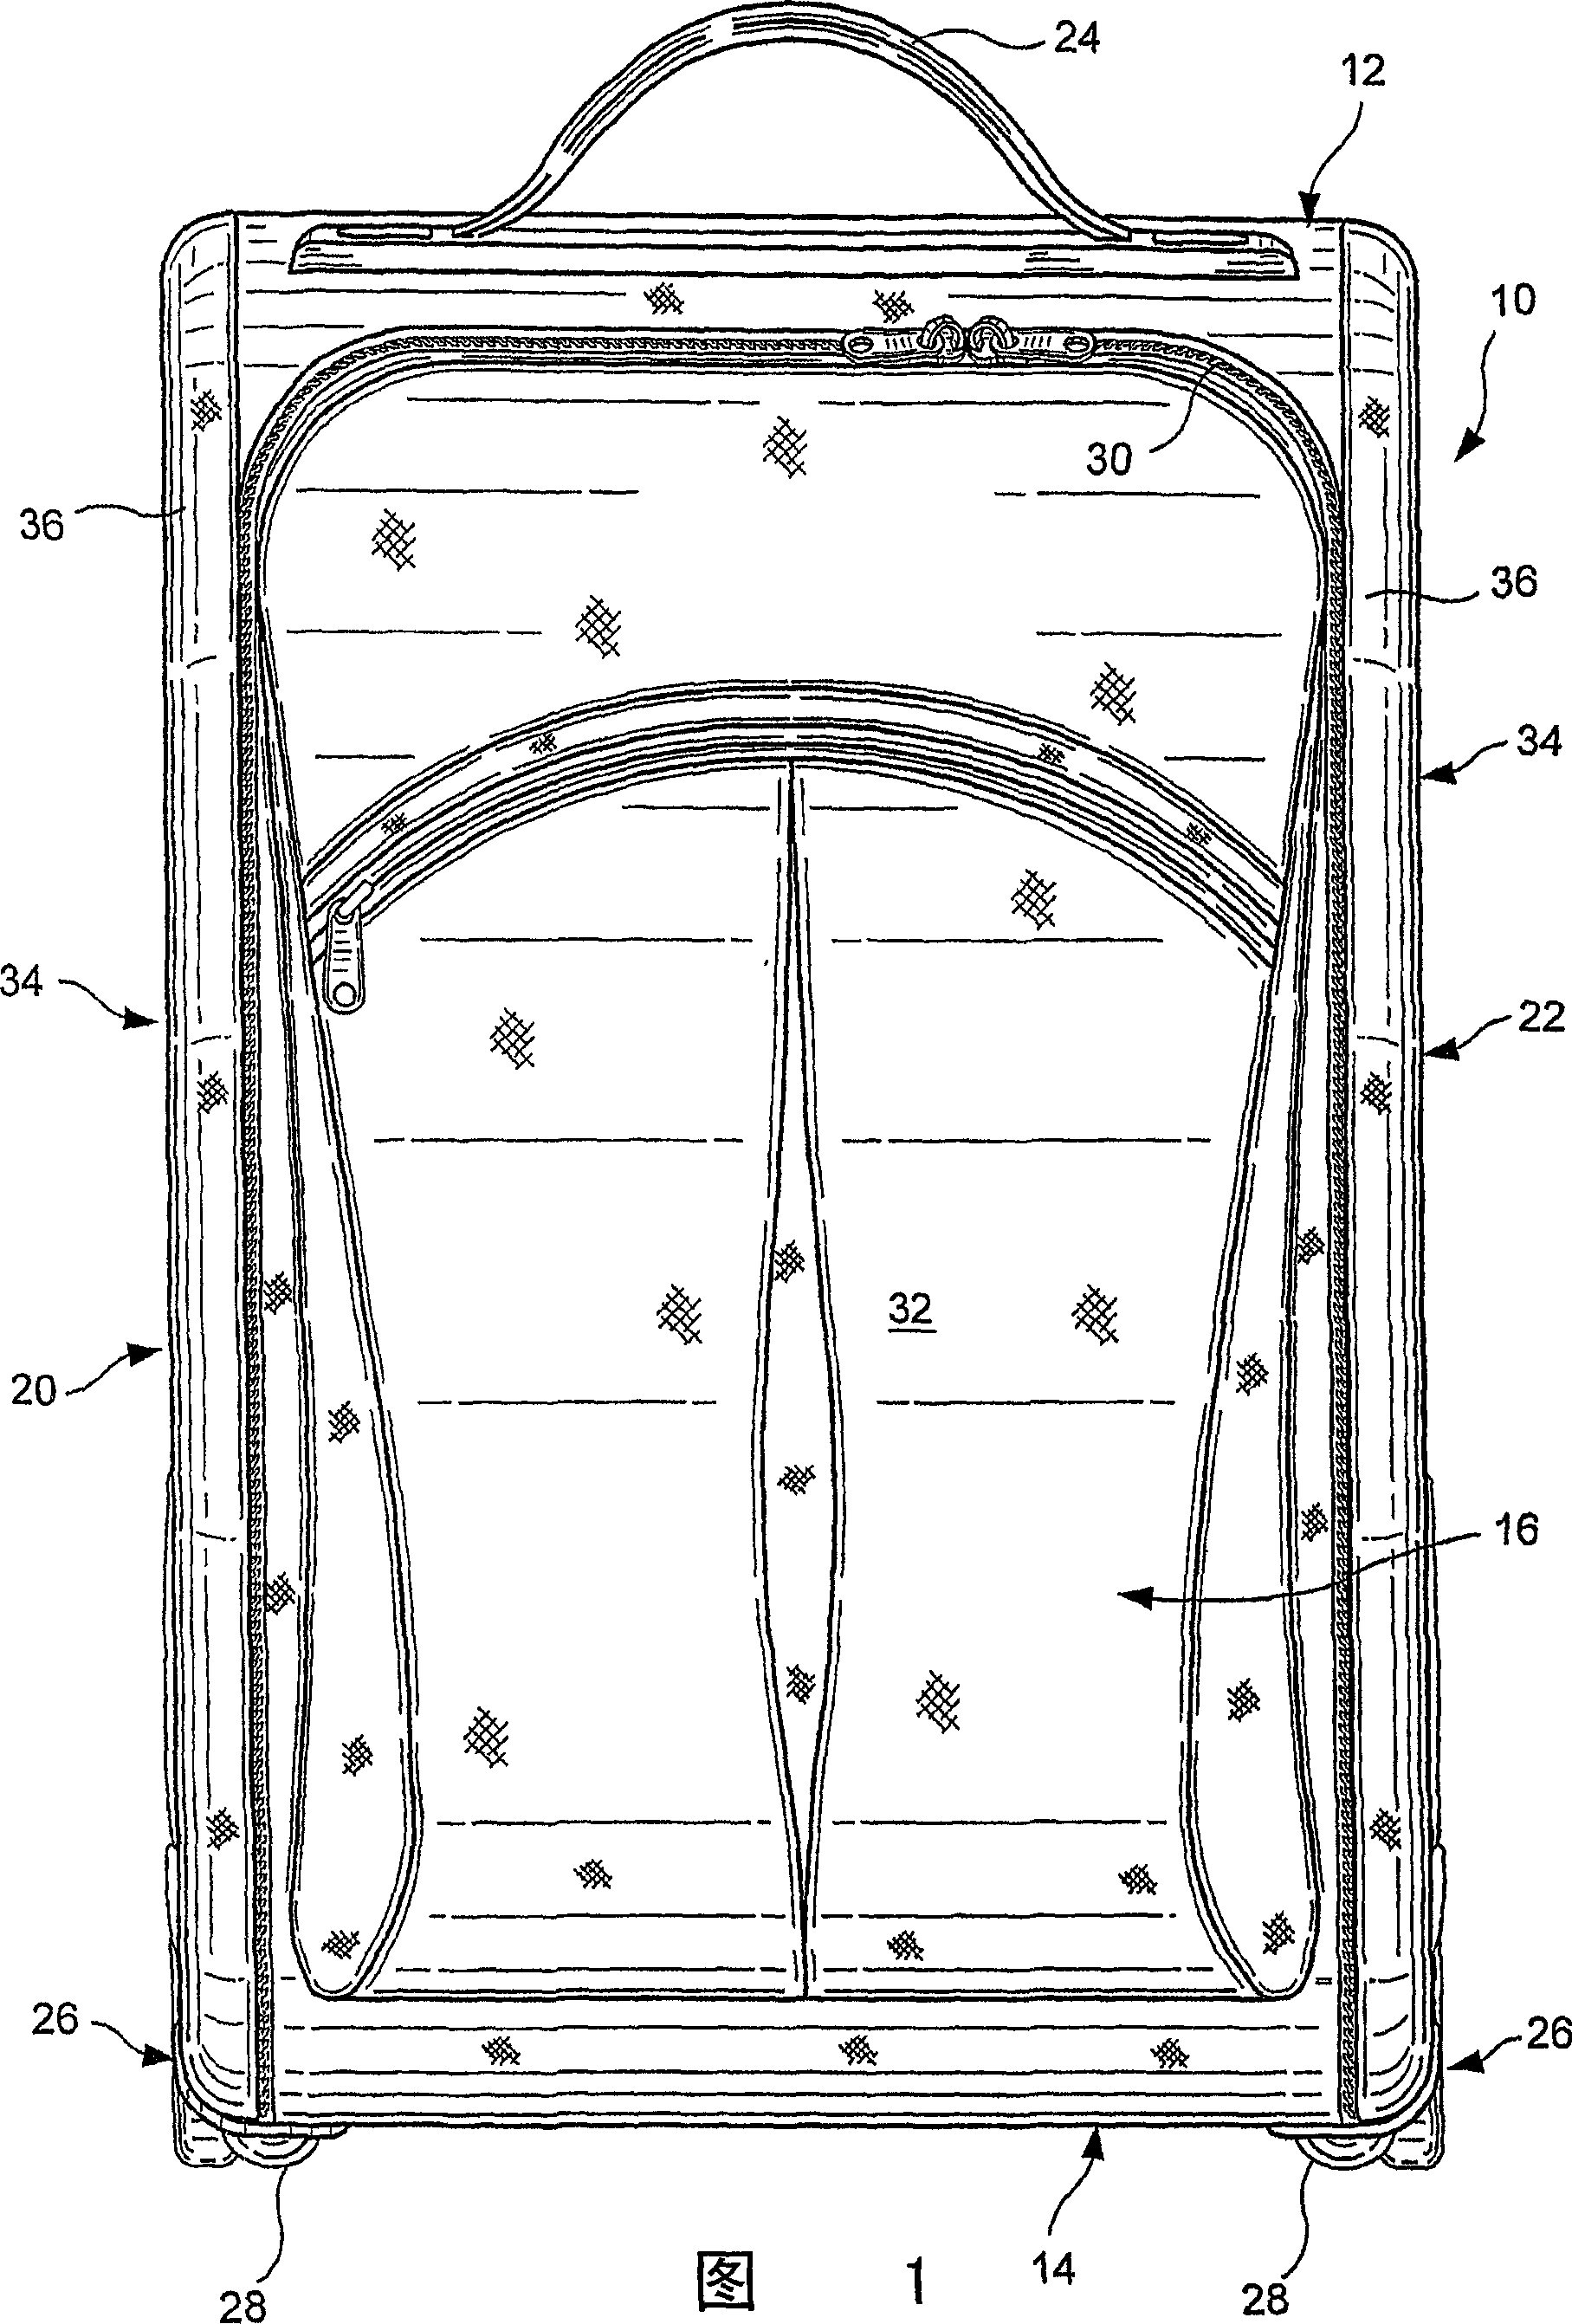 Gusset for a light-weight bag, a bag assembled therefrom, and methods for the manufacture and assembly thereof